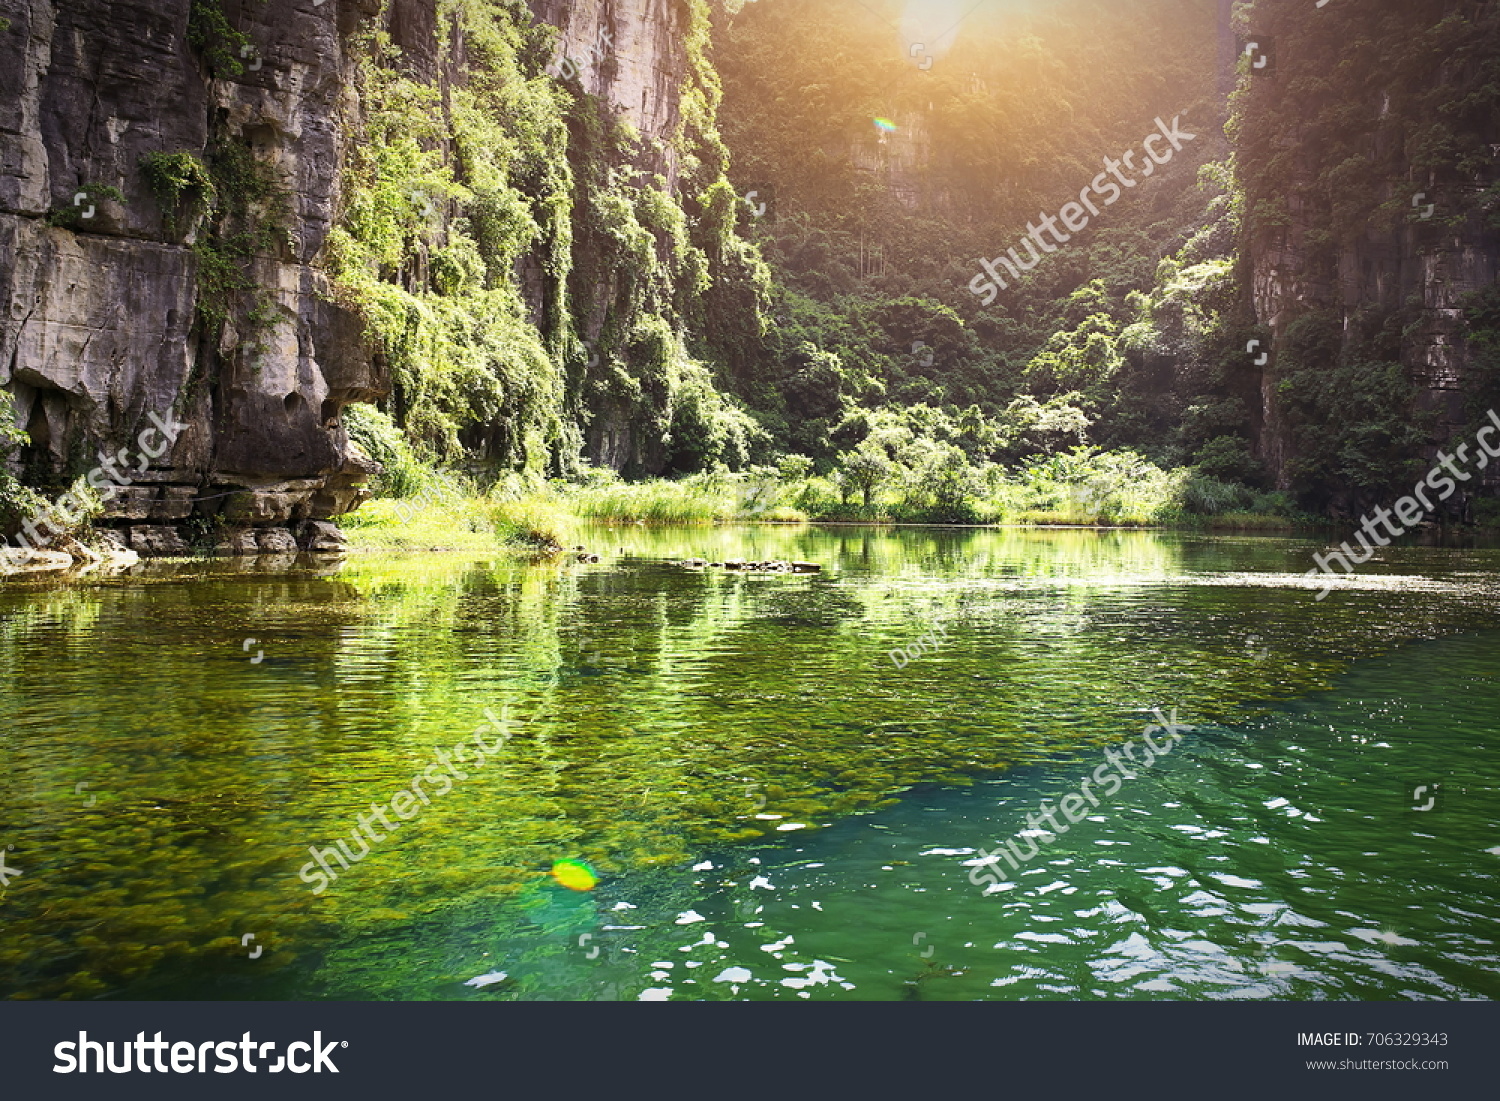 Trang An Scenic landscape complex - a scenic area near Ninh Binh, Vietnam, was inscribed as a UNESCO World Heritage Site on 2014 #706329343